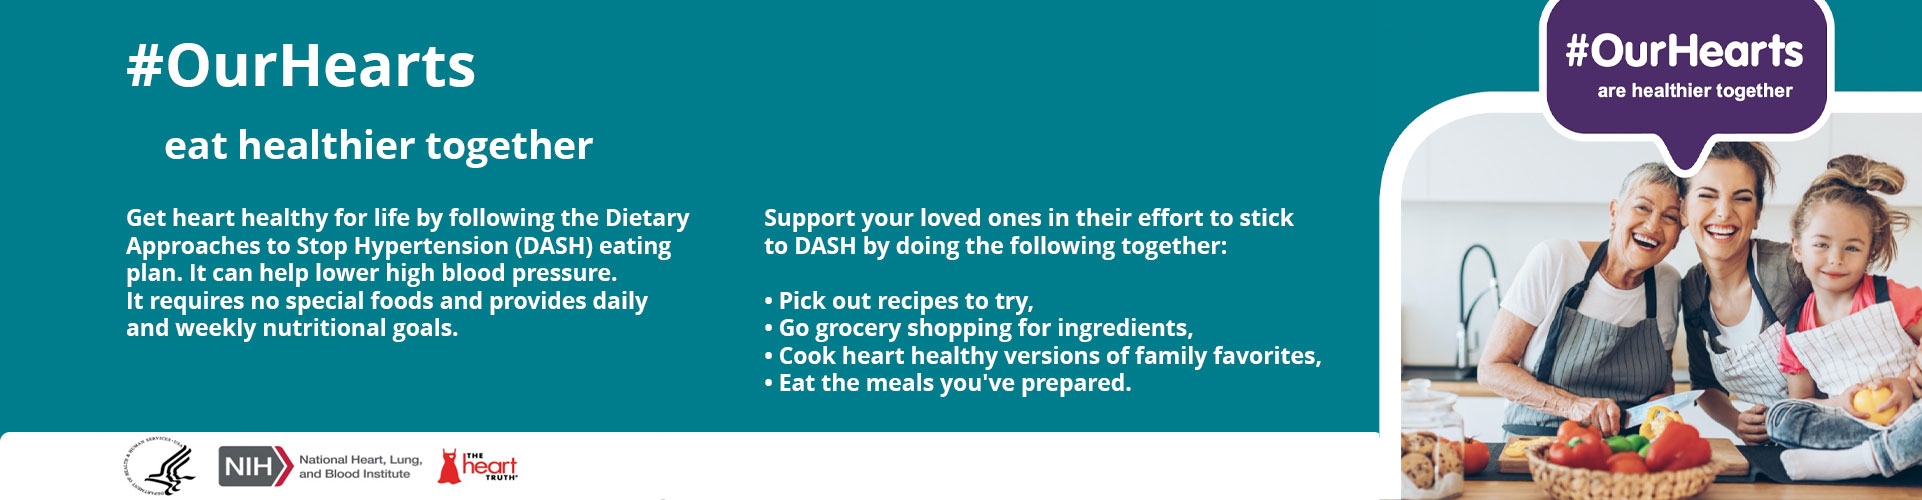 #OurHearts eat healthier together. Get heart healthy for life by following the Dietary Approaches to Stop Hypertension (DASH) eating plan. It can help lower high blood pressure. It requires no special foods and provides daily and weekly nutritional goals. Support your loved ones in their effort to stick to DASH by doing the following together: pick out recipes to try, go grocery shopping for ingredients, cook heart healthy versions of family favorites, eat the meals you've prepared.